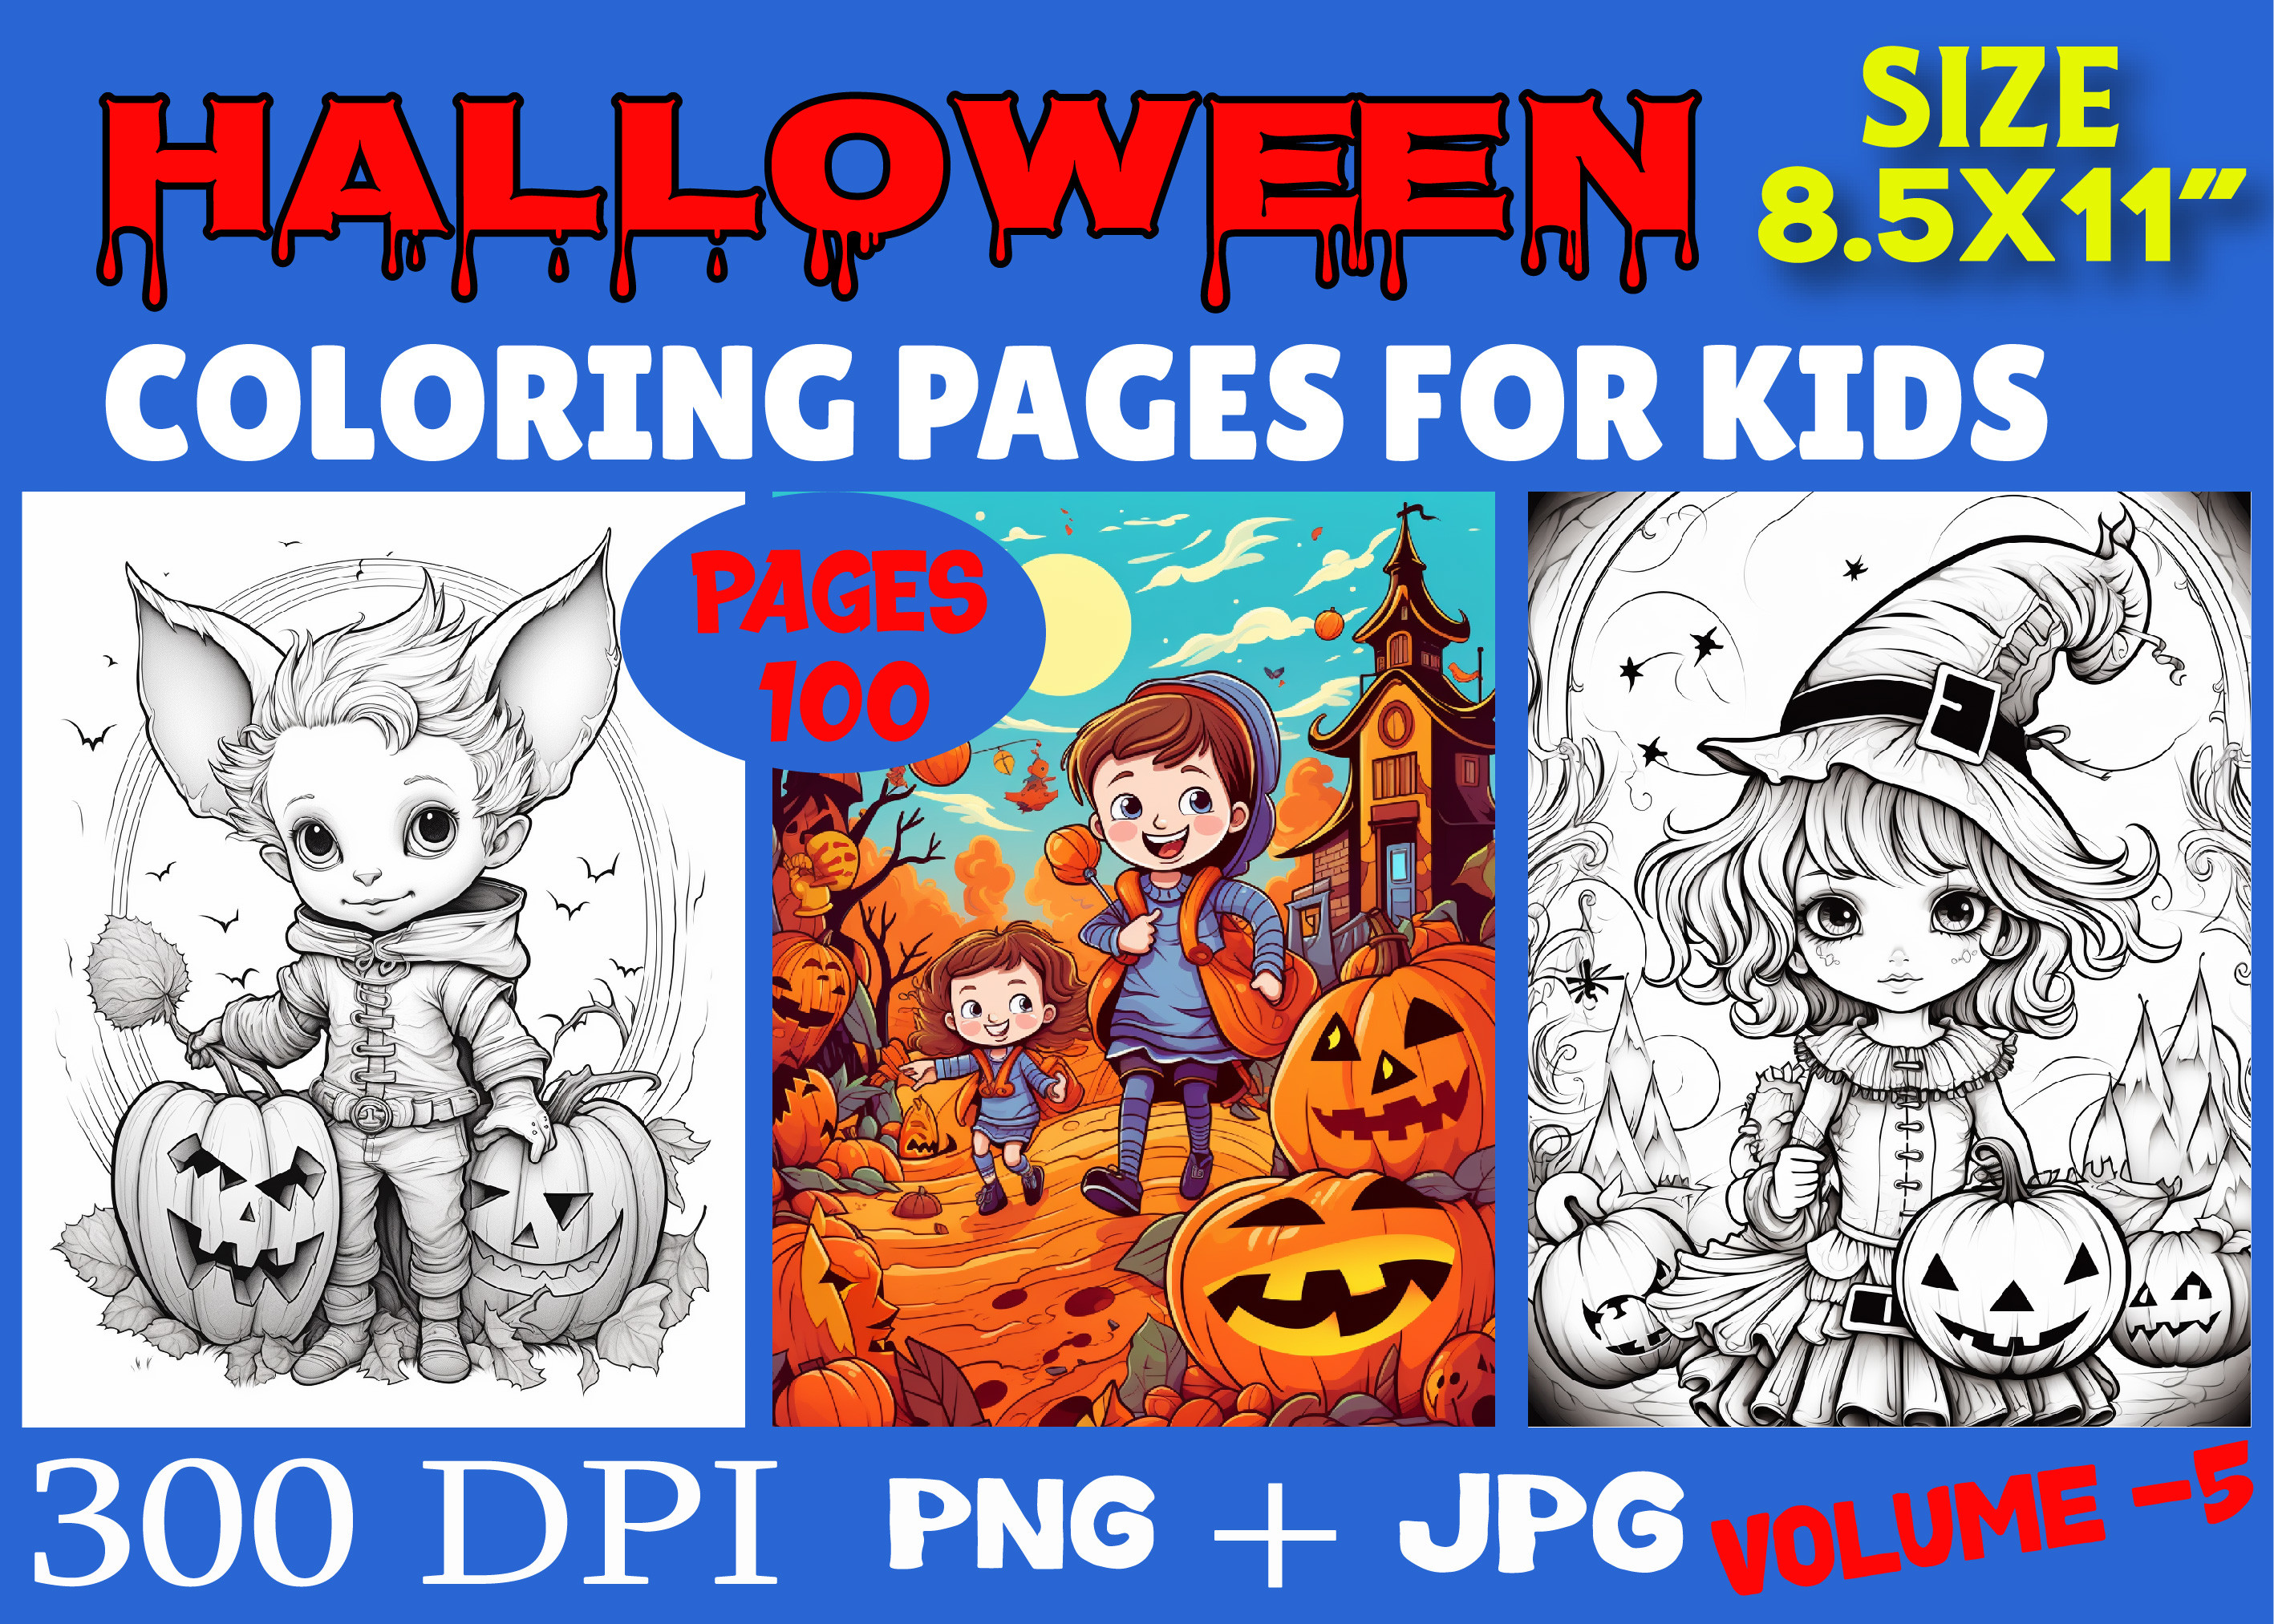 100-halloween-coloring-pages-for-kids-graphic-by-art-zone-creative